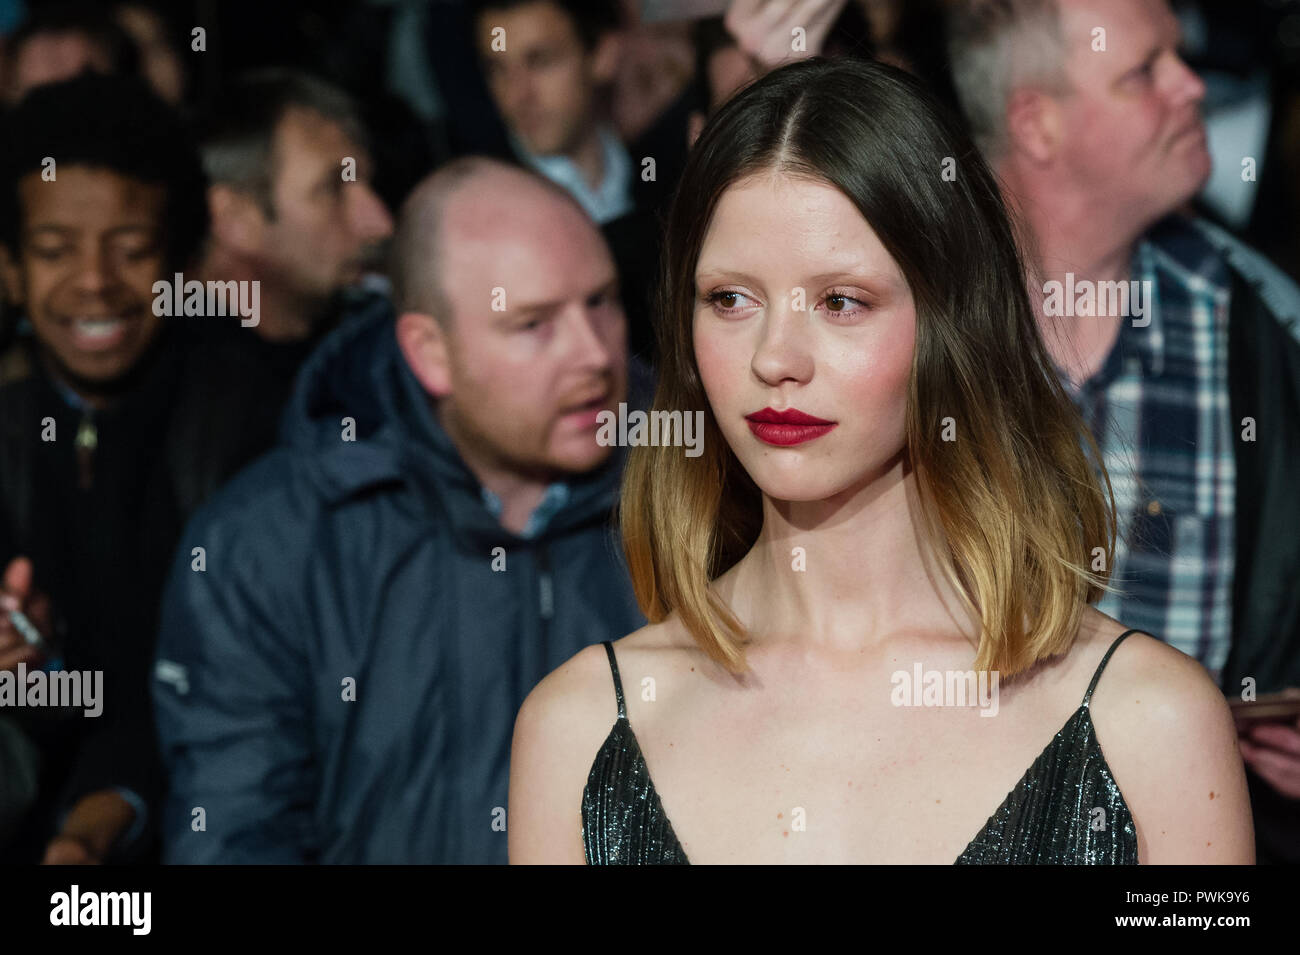 London, UK. 16th October 2018. Mia Goth attends the UK film premiere of 'Suspiria' at Cineworld, Leicester Square, during the 62nd London Film Festival Headline Gala. Credit: Wiktor Szymanowicz/Alamy Live News Stock Photo